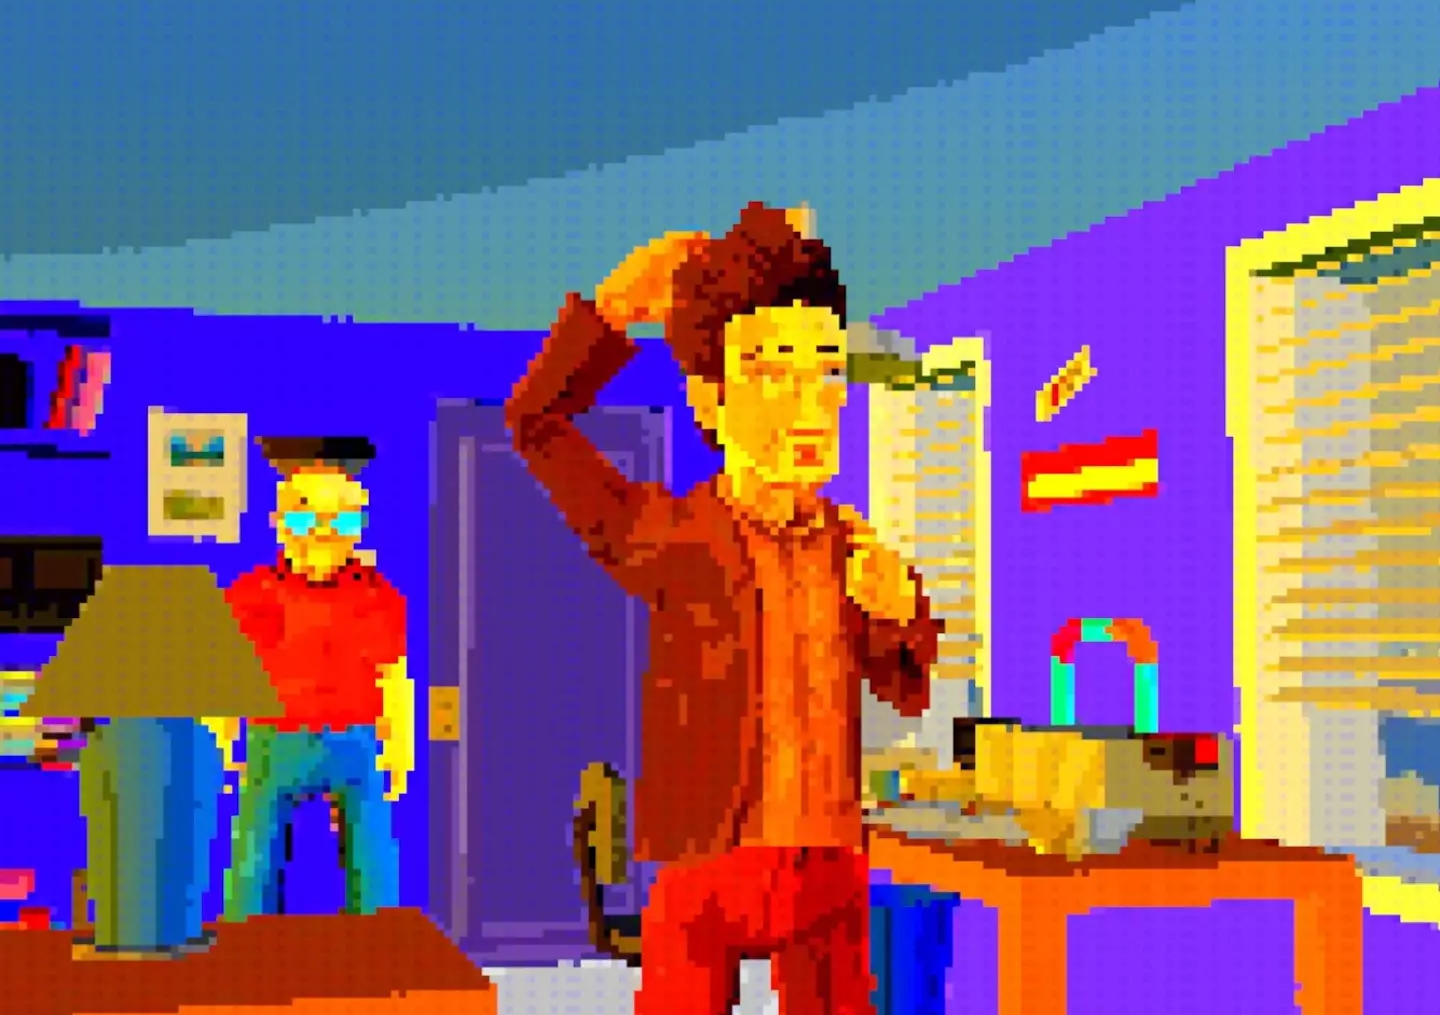 An AI generated script is acted out by pixelated characters, and it never stops.